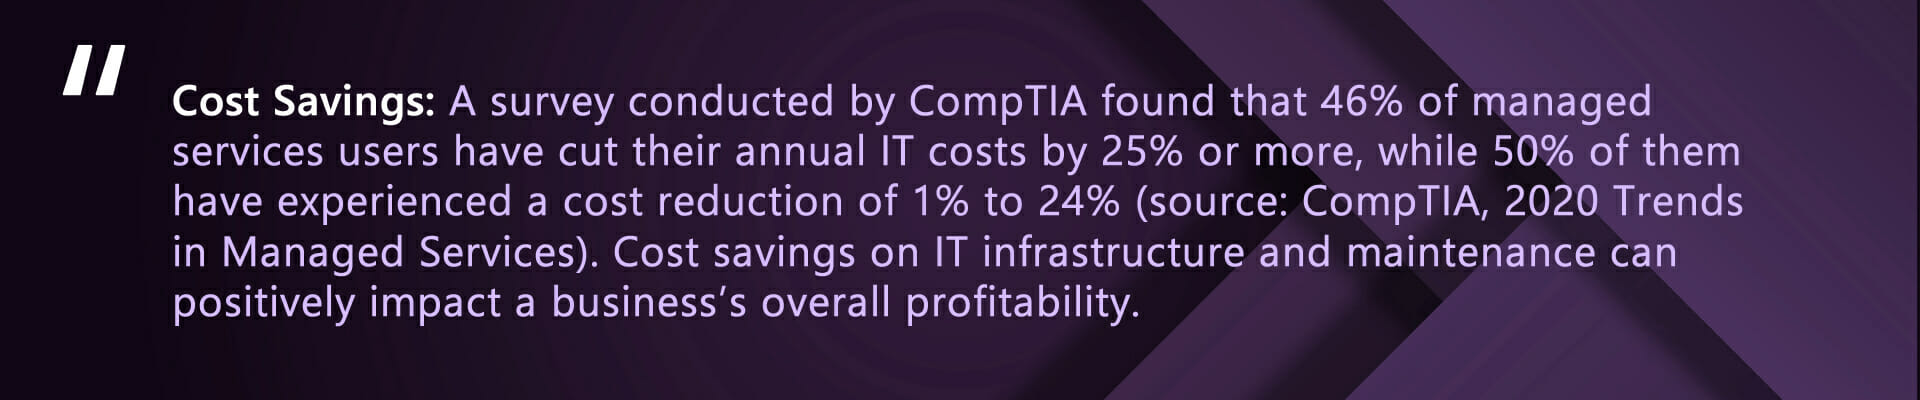 Cost Savings: A survey conducted by CompTIA found that 46% of managed services users have cut their annual IT costs by 25% or more, while 50% of them have experienced a cost reduction of 1% to 24% (source: CompTIA, 2020 Trends in Managed Services). Cost savings on IT infrastructure and maintenance can positively impact a business's overall profitability.